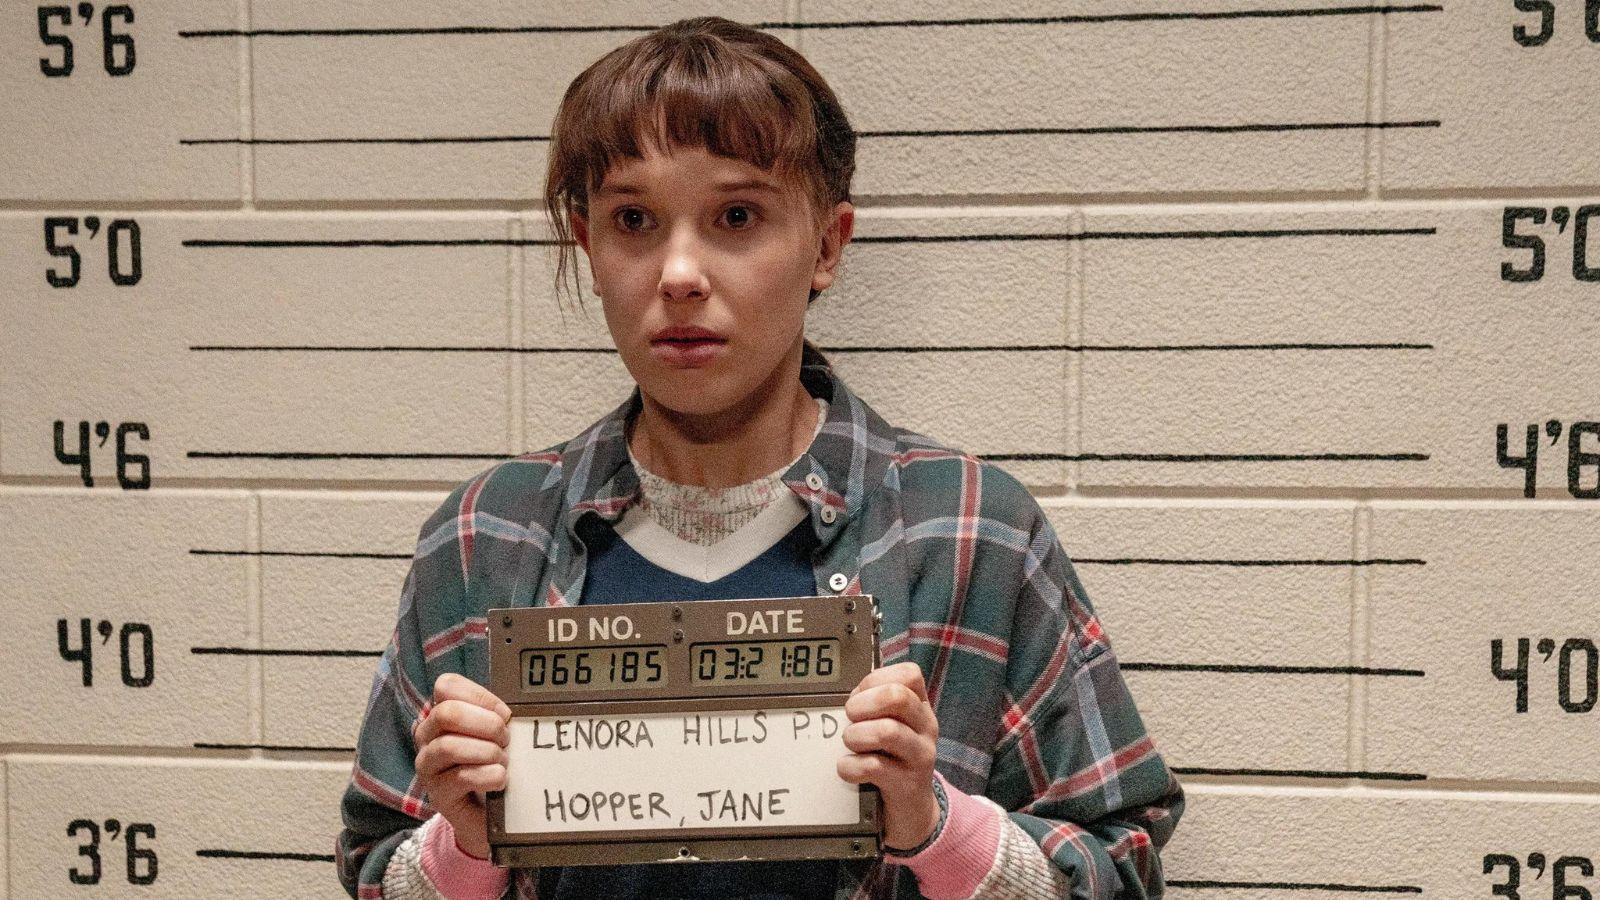 Millie Bobby Brown as Eleven in Stranger Things